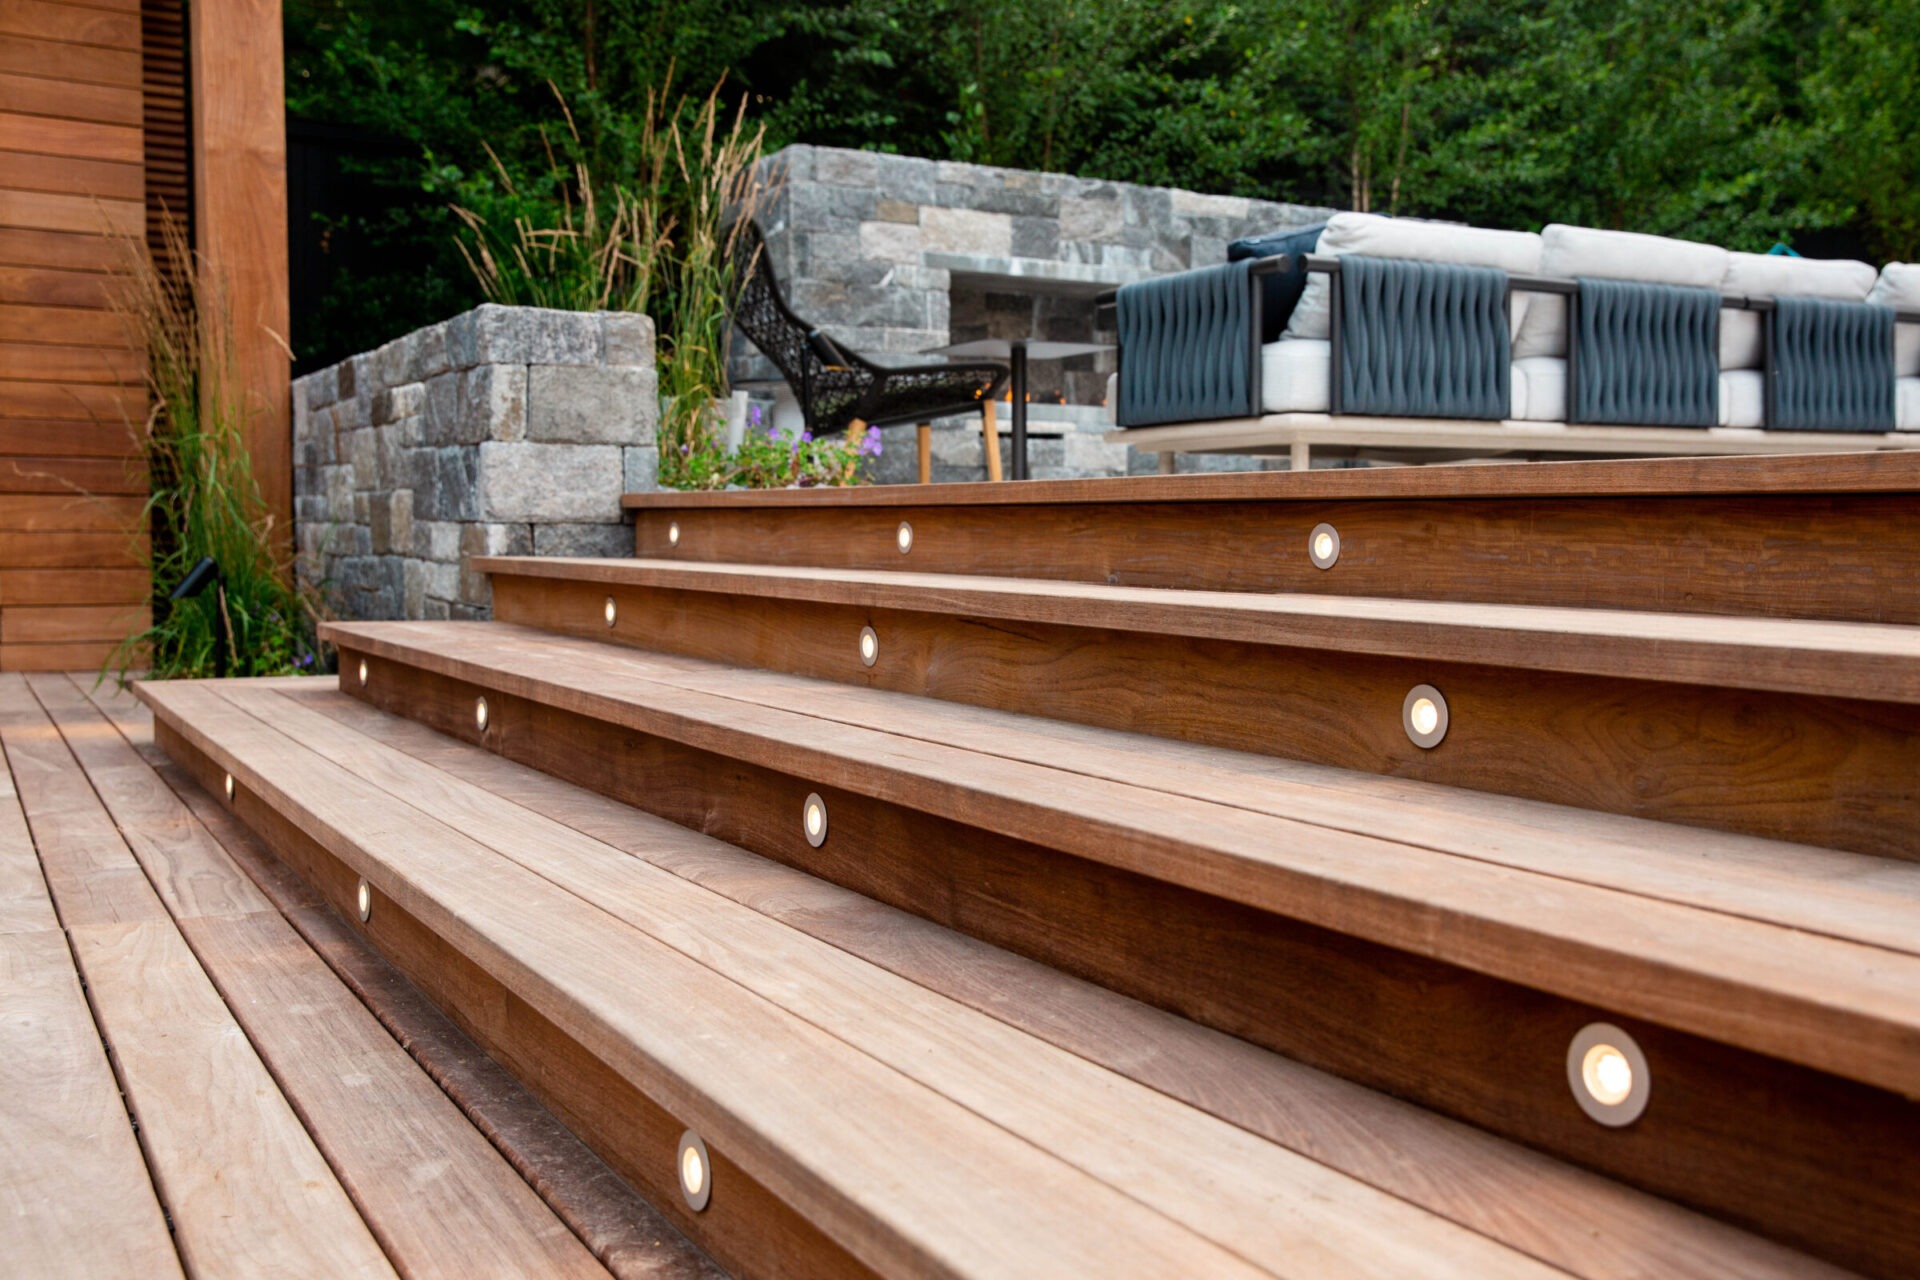 This image shows a well-maintained wooden deck with integrated lights on steps leading to a cozy outdoor seating area with cushions and a stone fireplace.